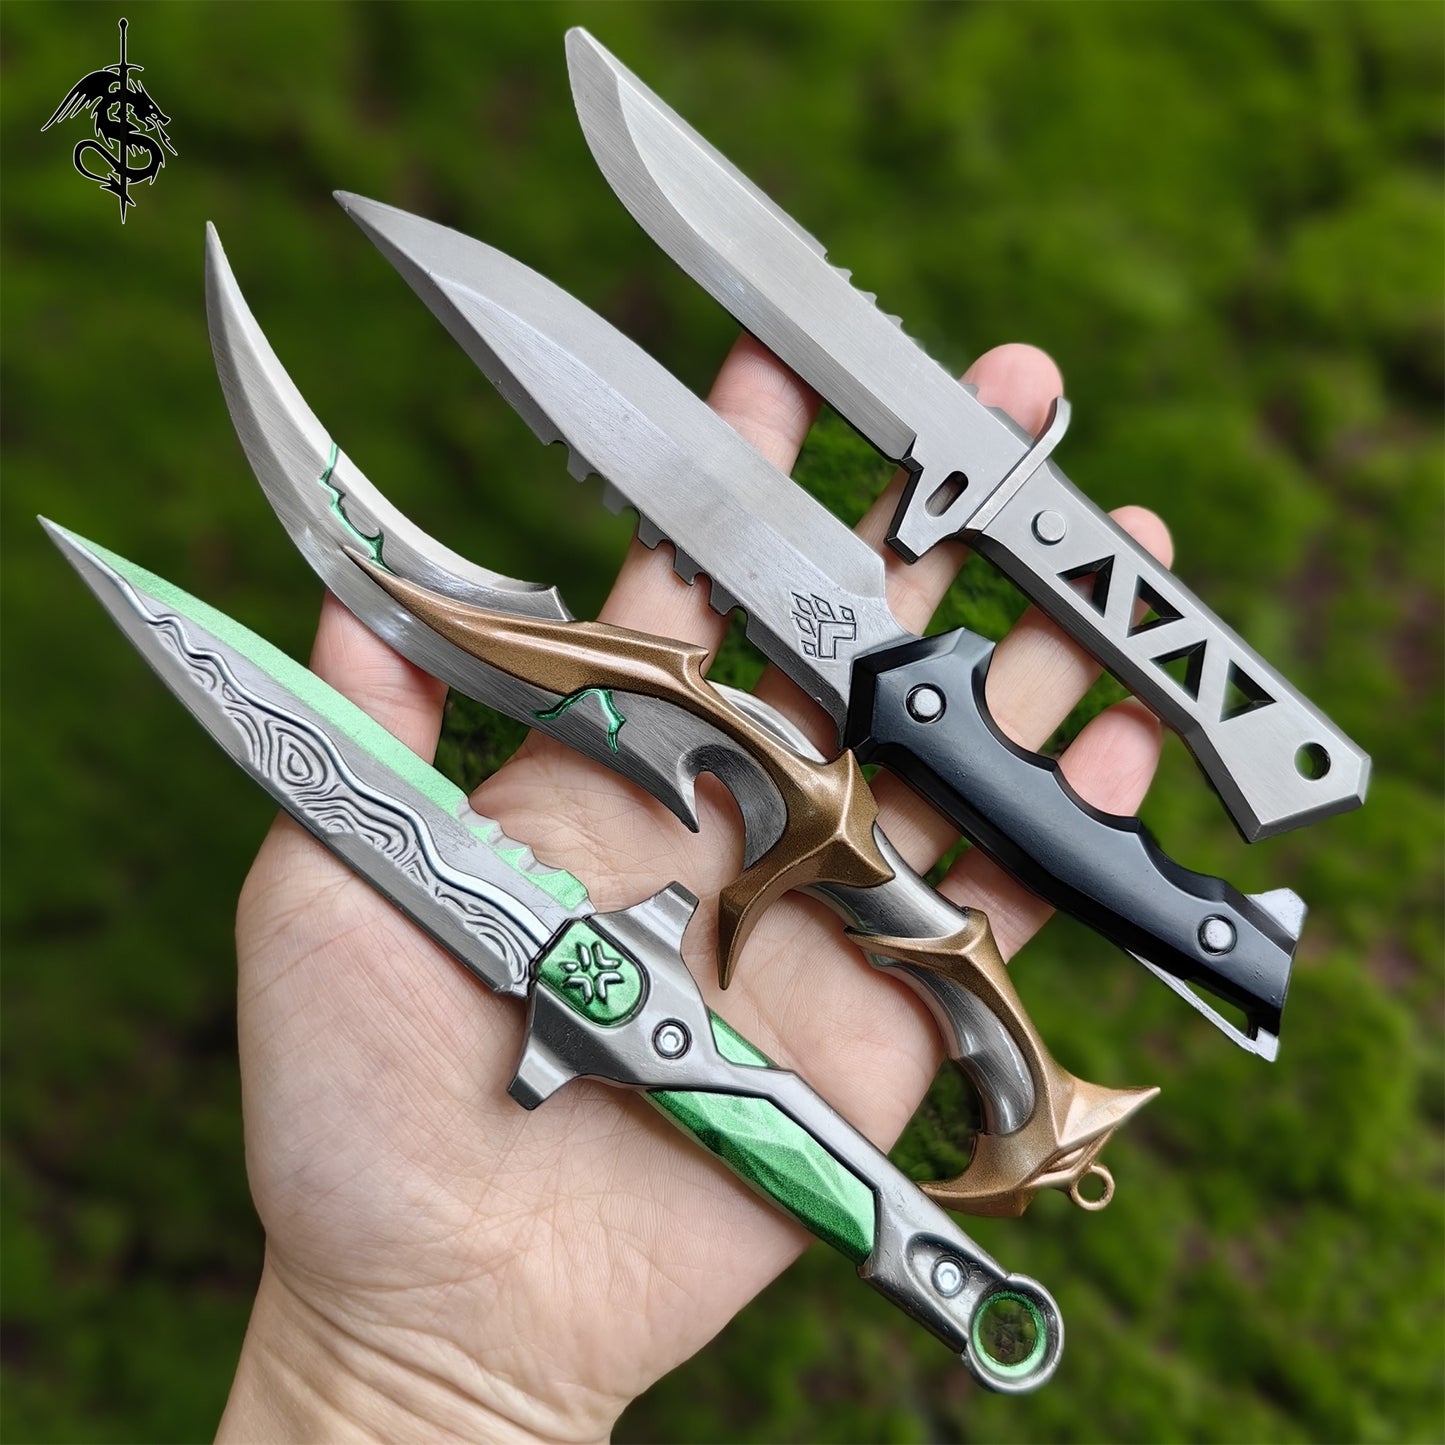 Metal Val Game Knife For Collection 4 In 1 Pack